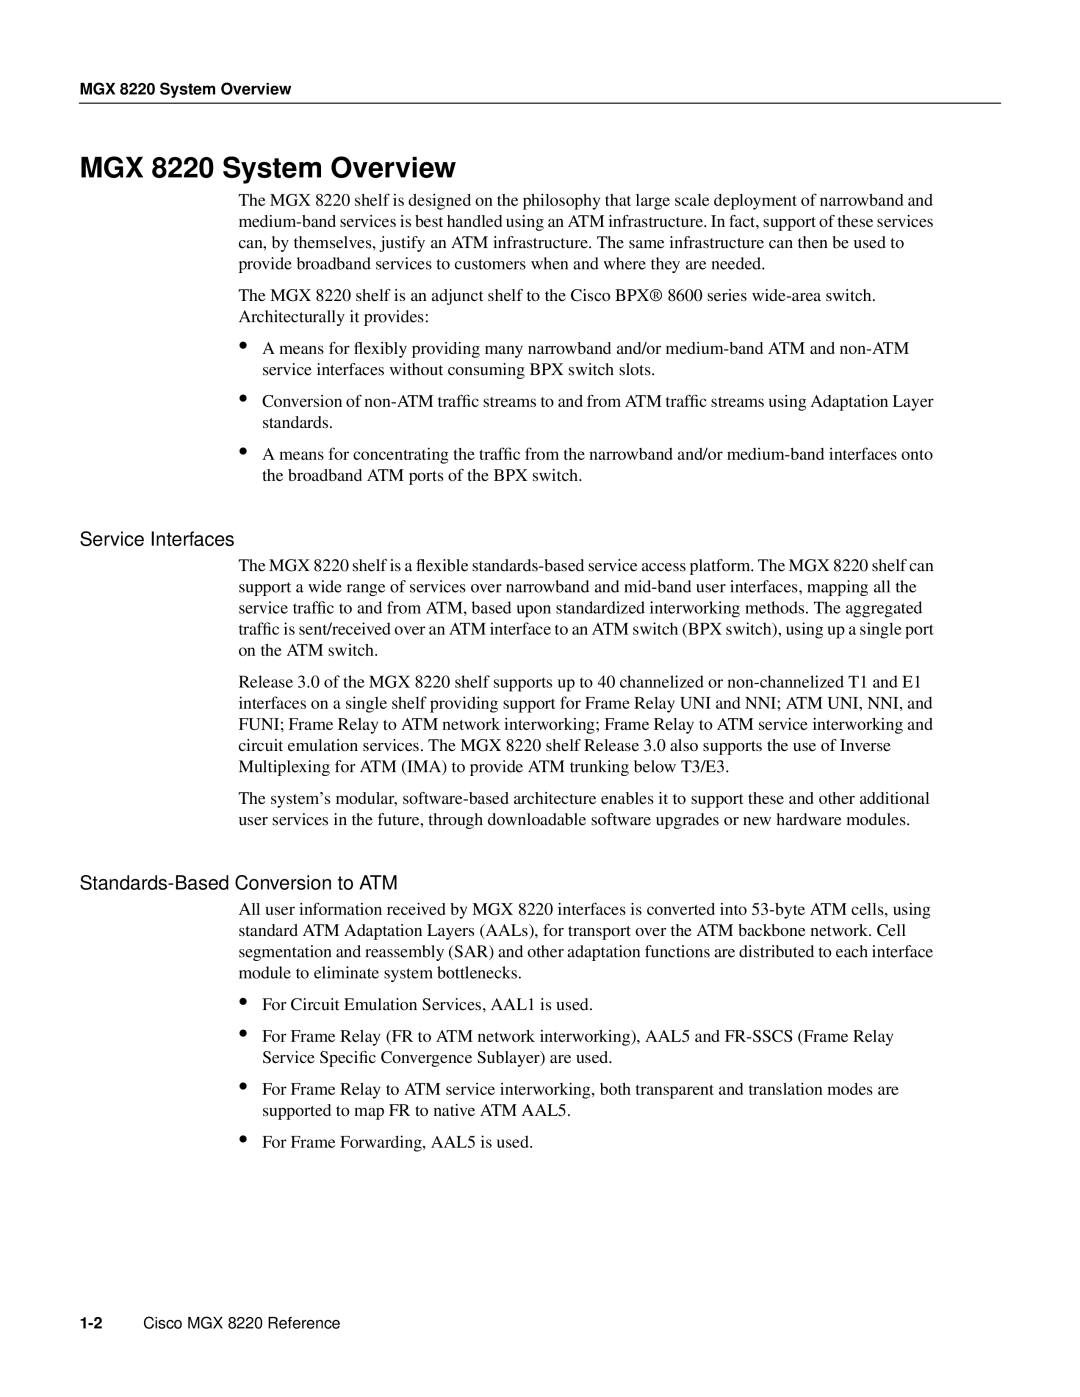 Cisco Systems manual MGX 8220 System Overview, Service Interfaces, Standards-Based Conversion to ATM 